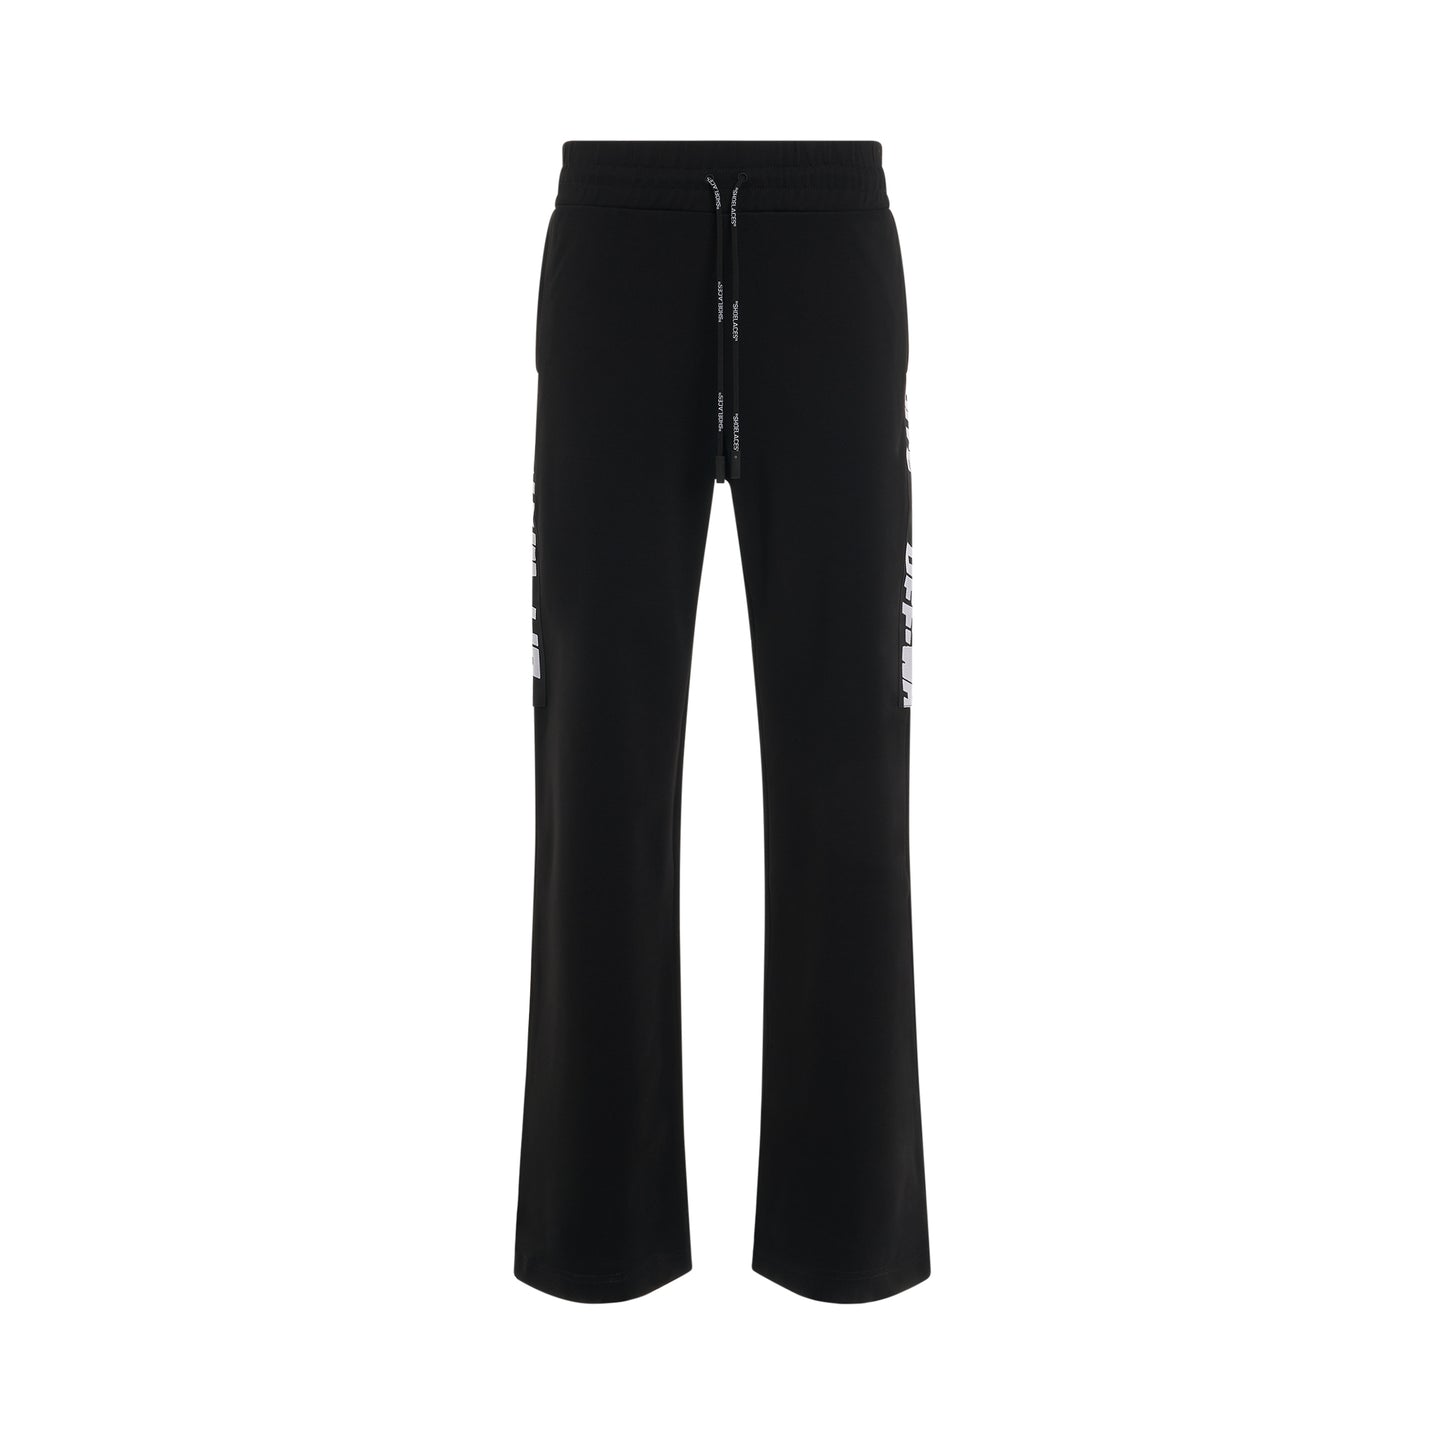 Athleisure Logo Band Track Pants in Black